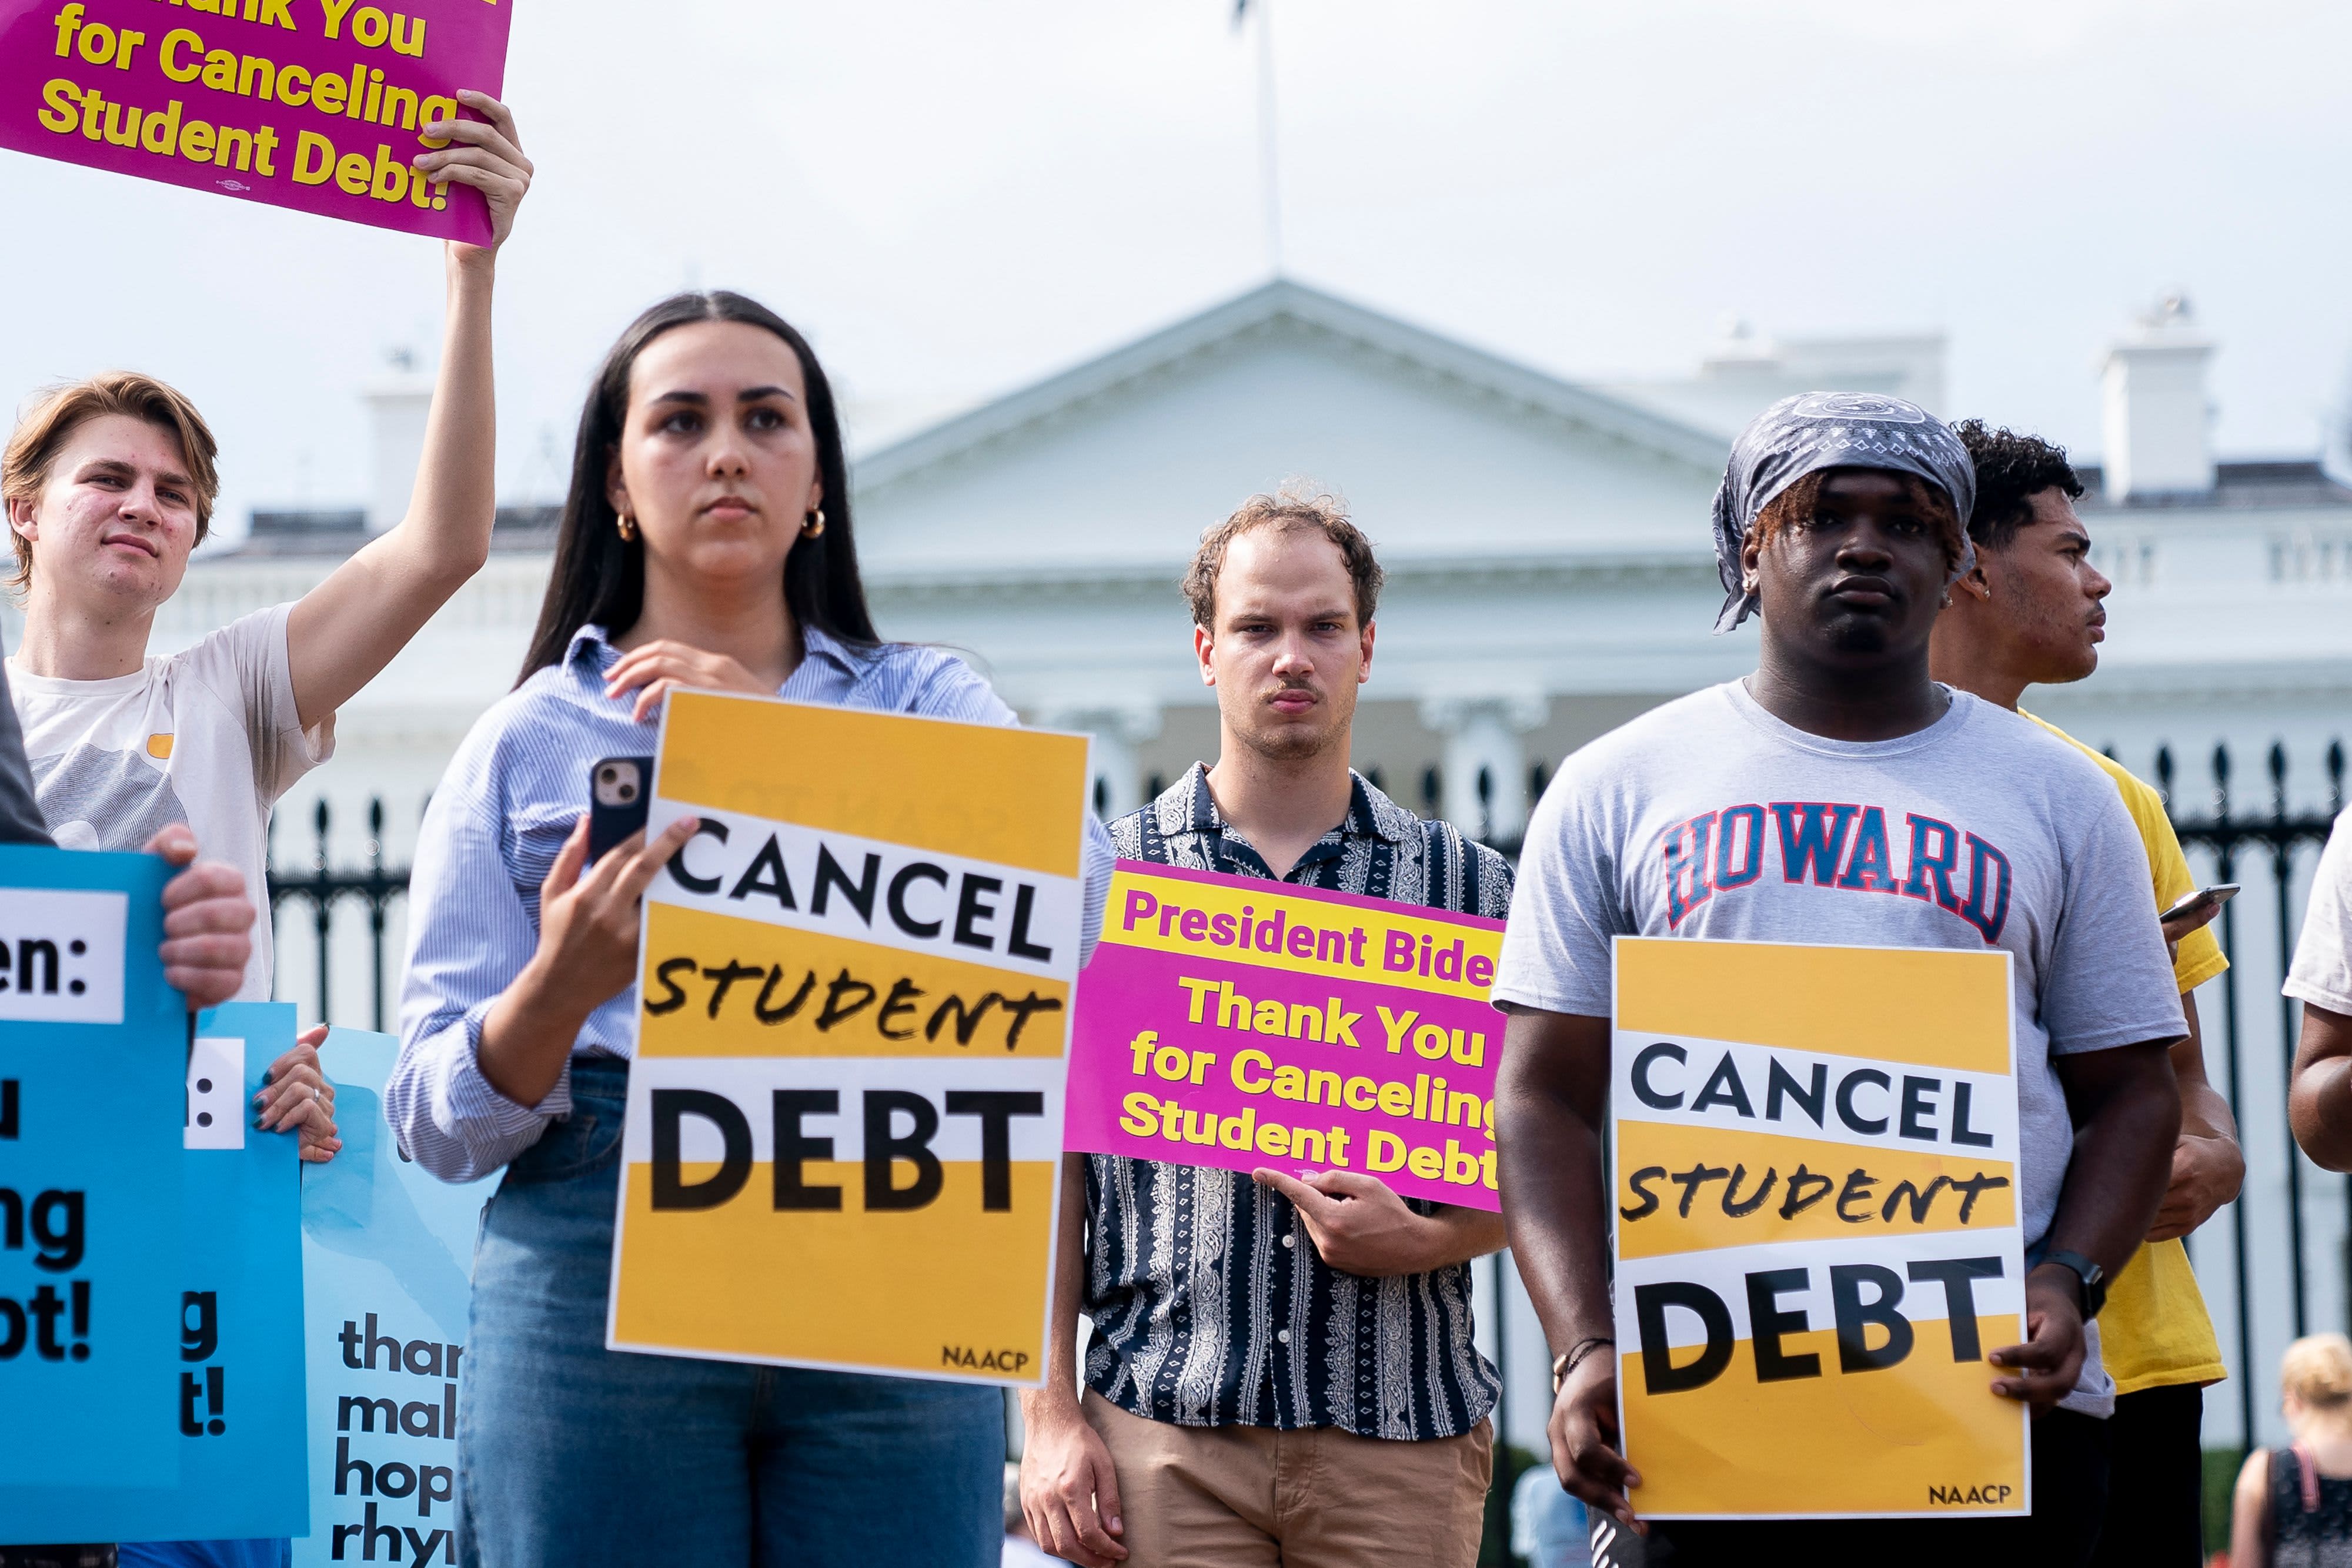 Over 700,000 borrowers no longer qualify for student loan relief